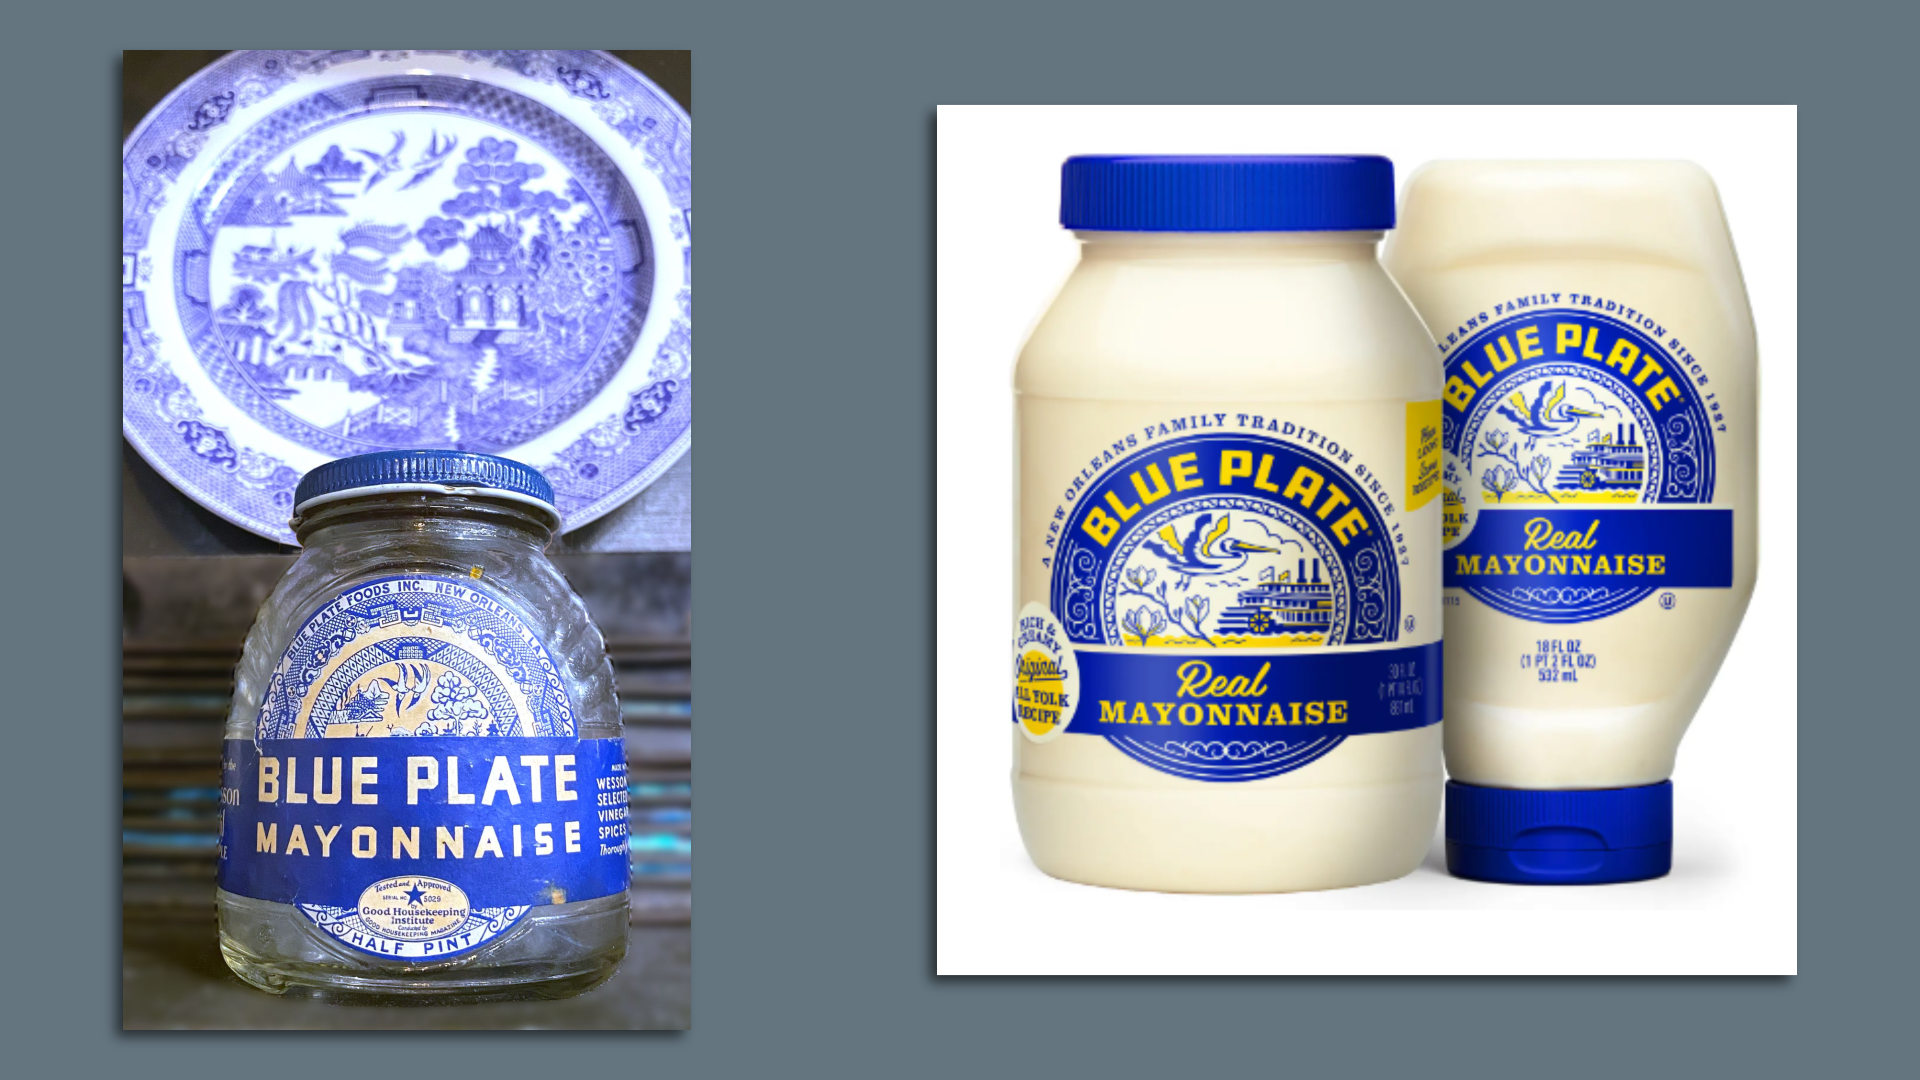 The image shows two photos. On the left is a vintage Blue Plate Mayonnaise jar with a blue Willow Ware plate behind it. On the right is the new Blue Plate logo on the regular plastic bottle and the squeeze bottle.